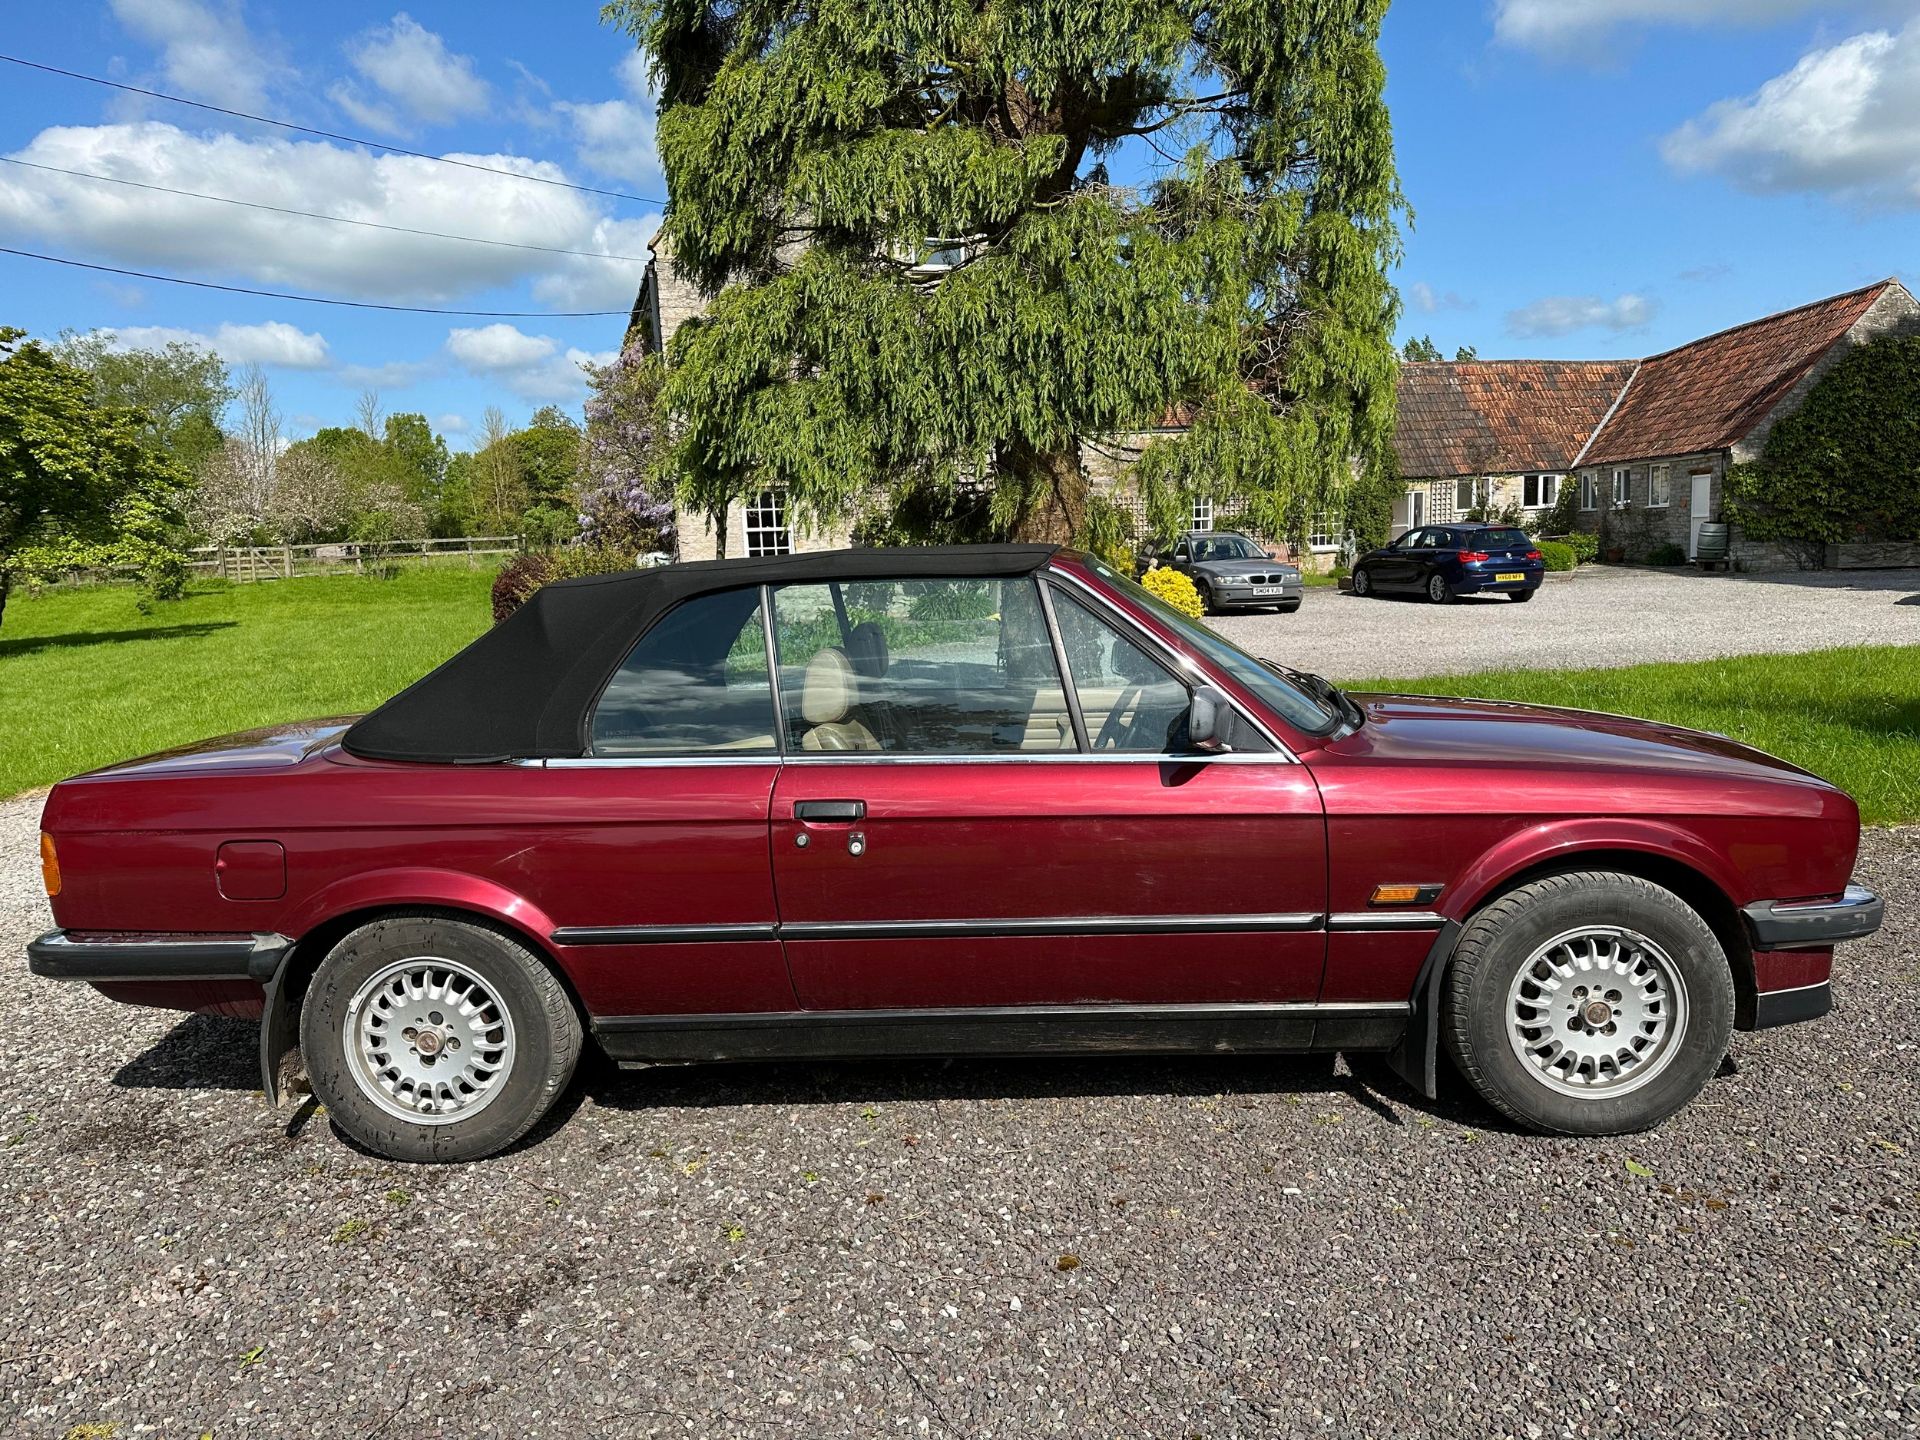 1990 BMW 325i Convertible Registration number G171 PYC Chassis number WBABB12070LB95832 Engine - Image 6 of 67